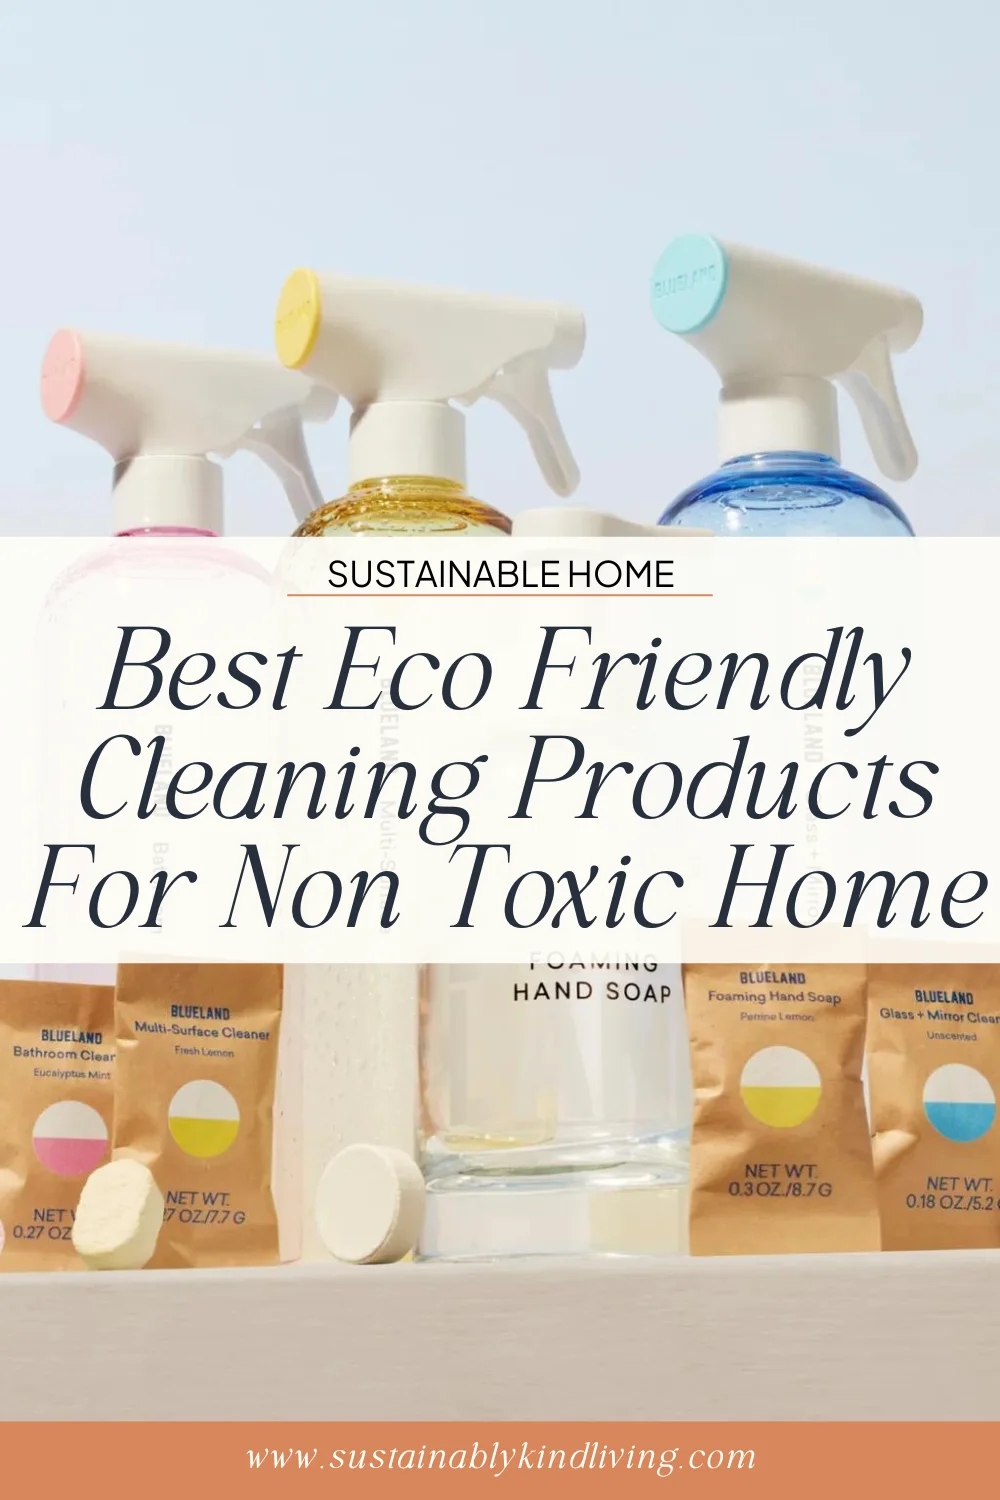 What Are The Top-rated Eco-friendly Cleaning Products For 2023?